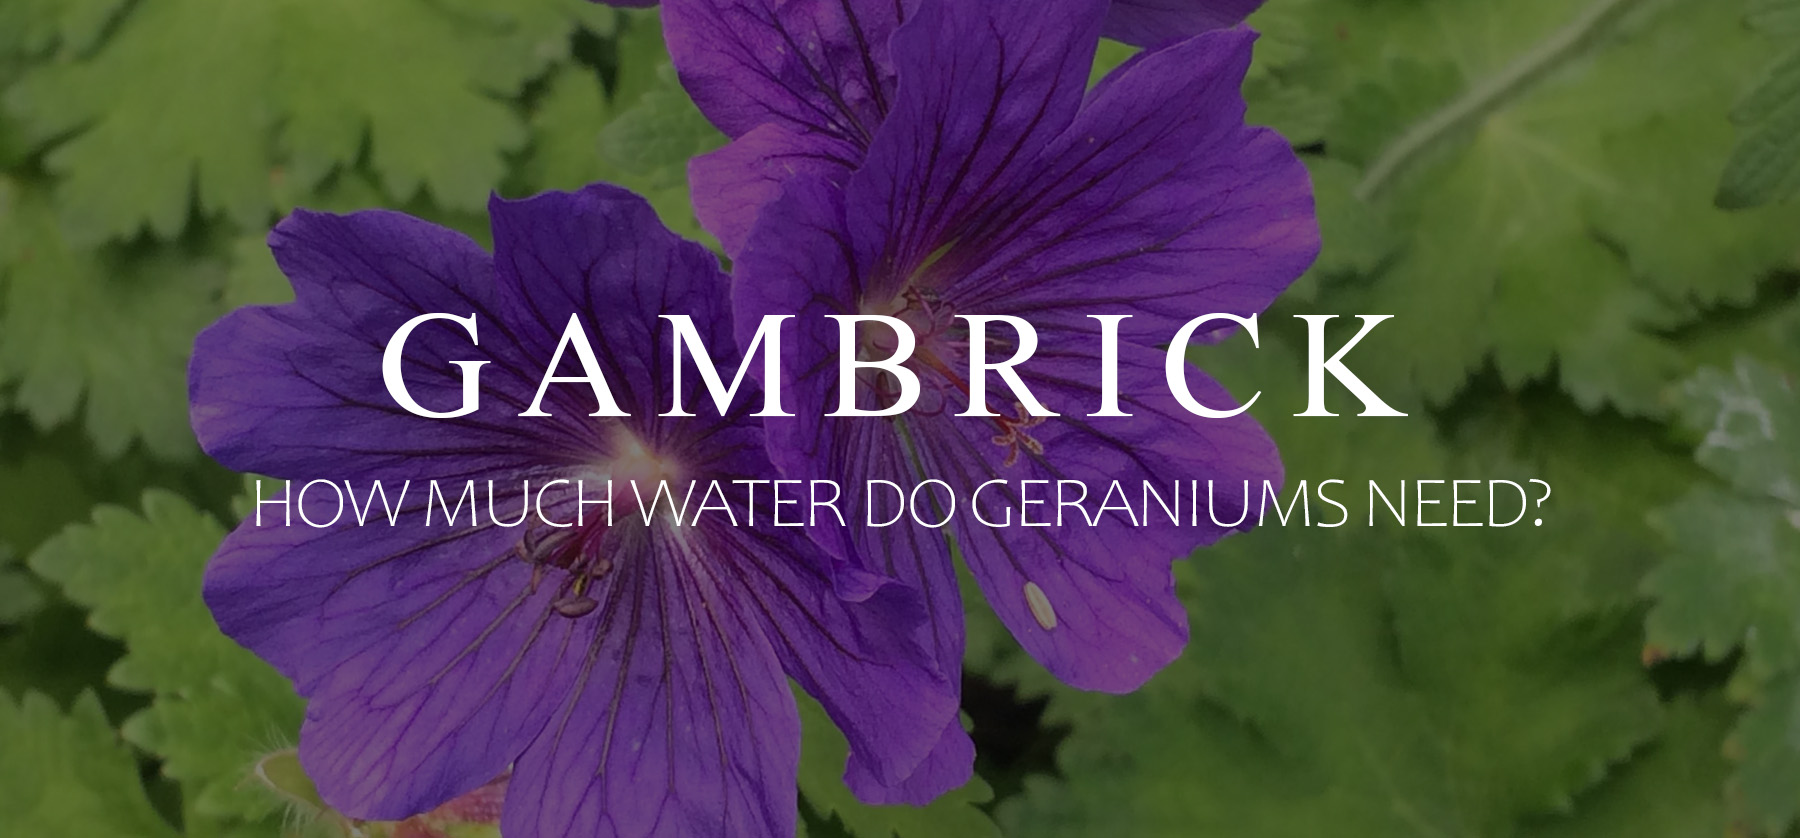 how much water do geraniums need banner 1.0